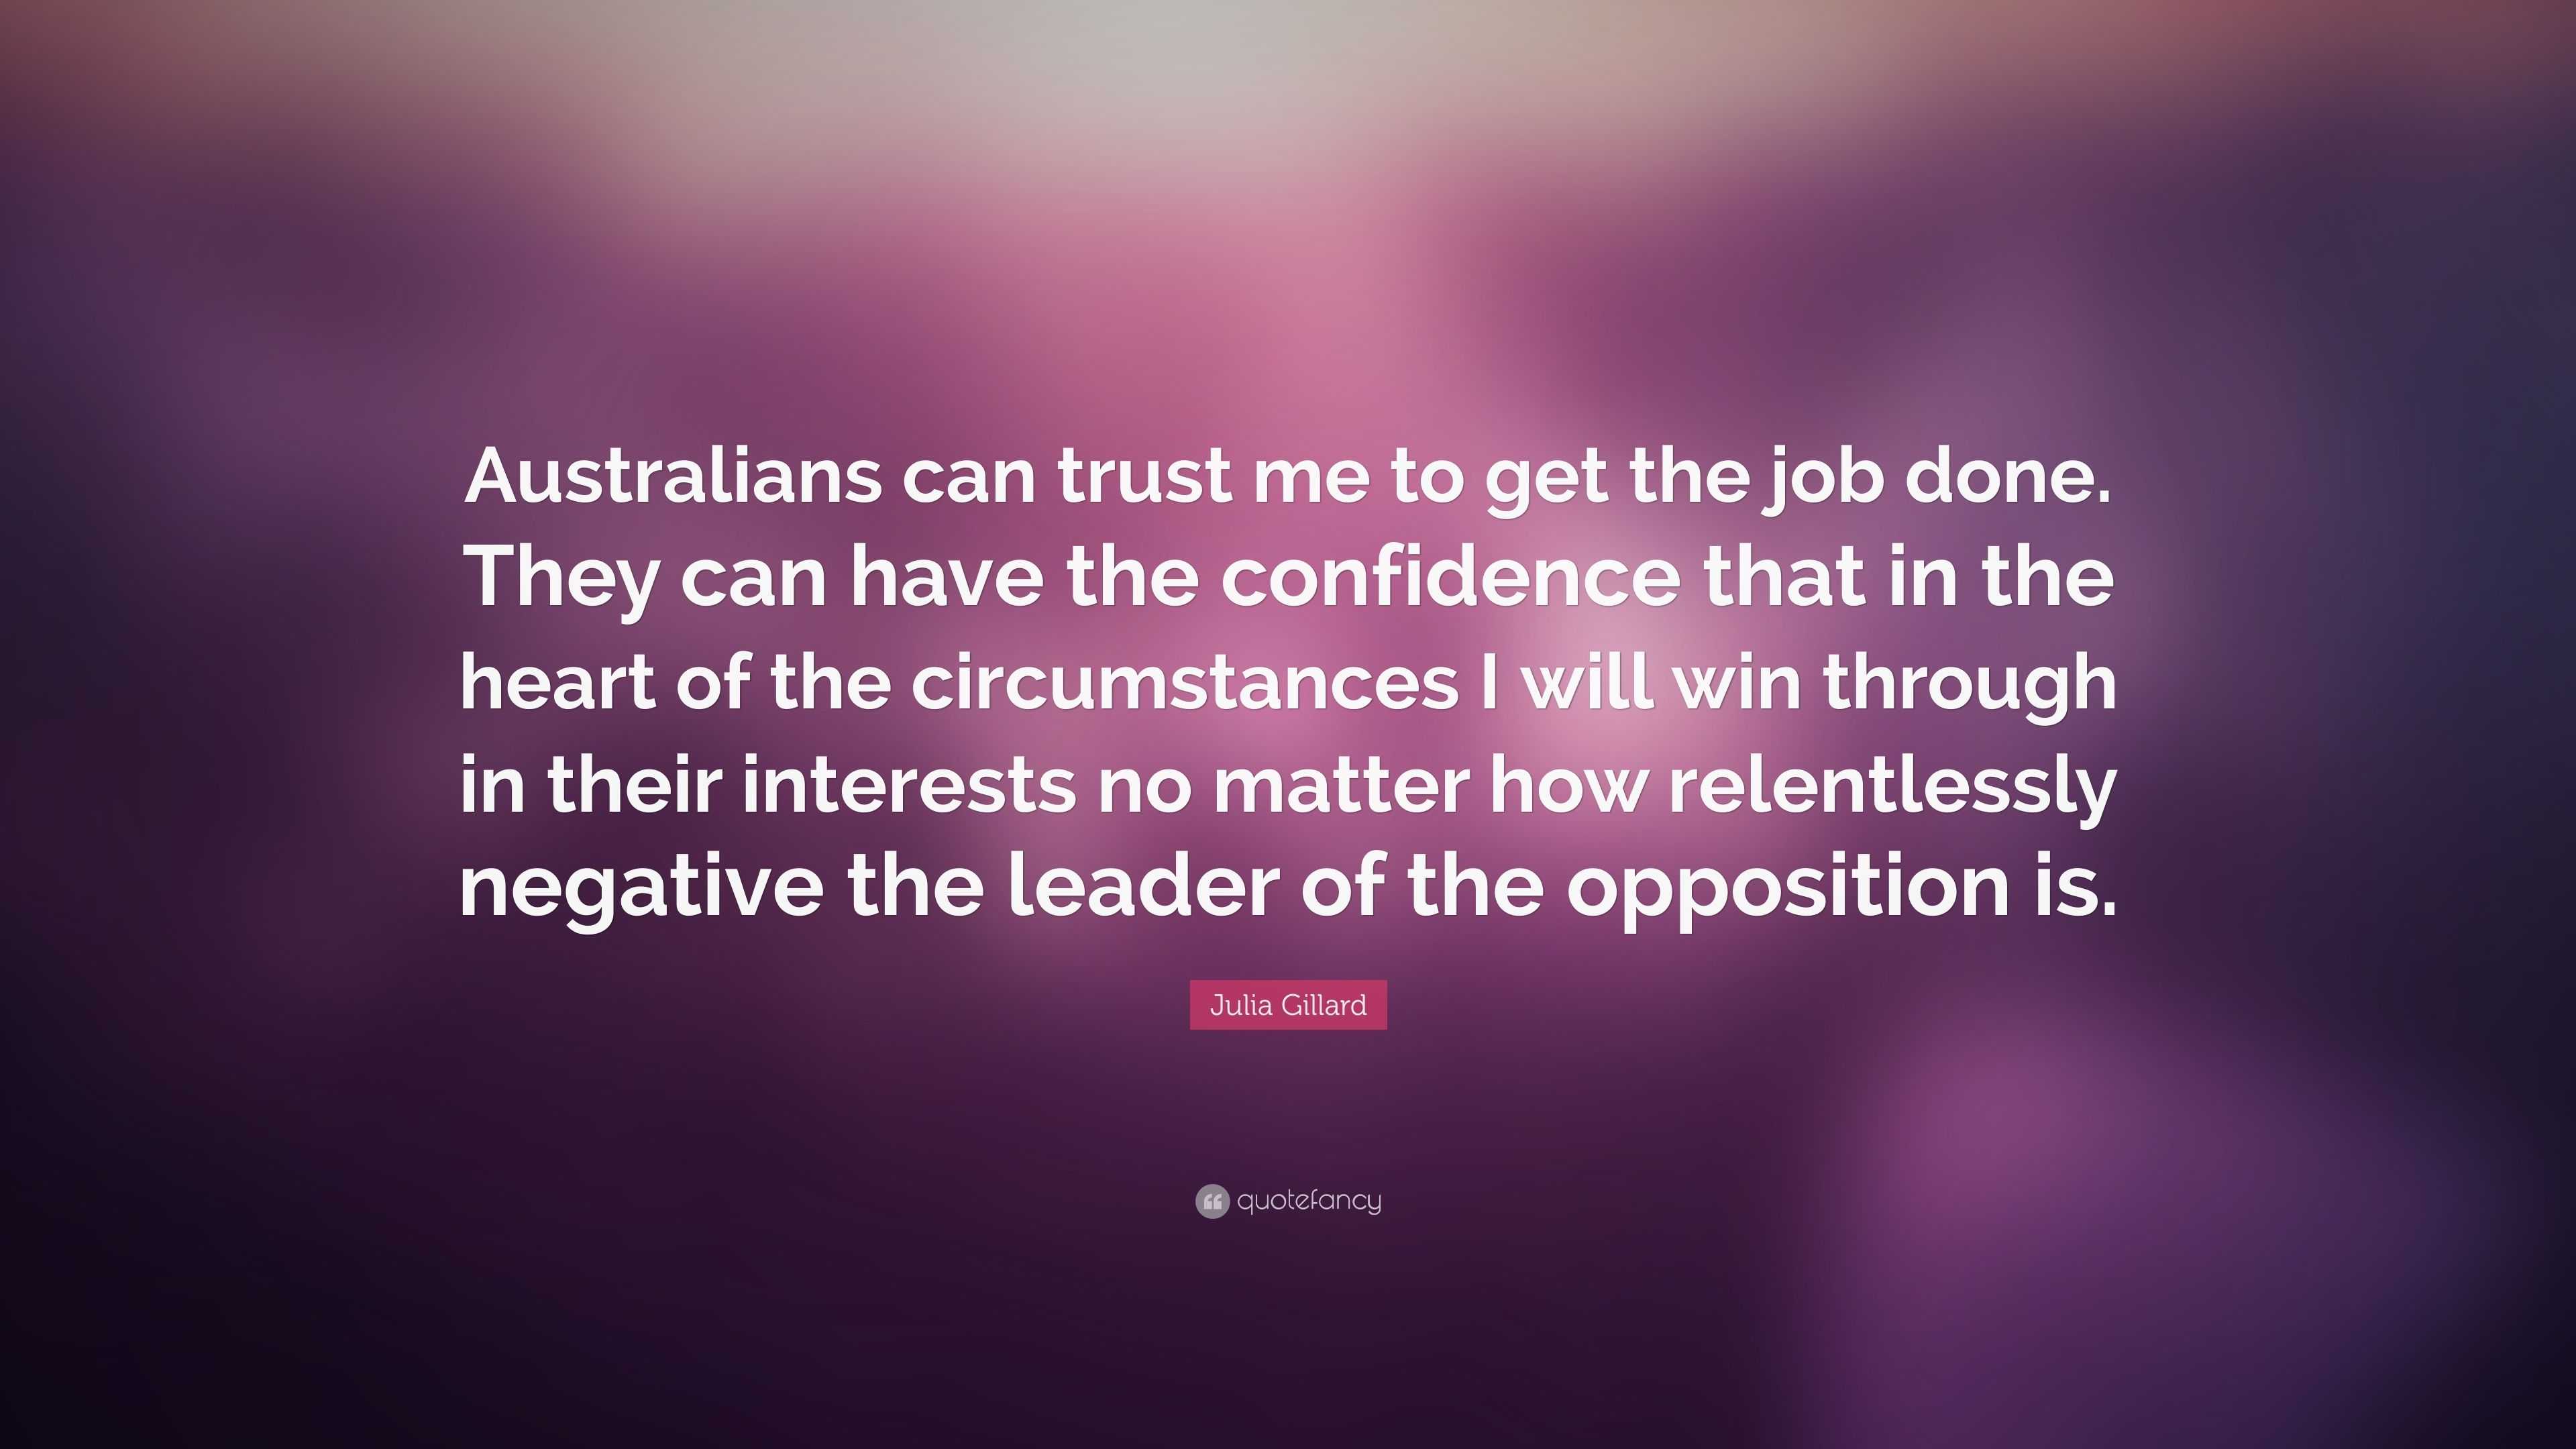 Julia Gillard Quote Australians Can Trust Me To Get The Job Done They Can Have The Confidence That In The Heart Of The Circumstances I Will 7 Wallpapers Quotefancy